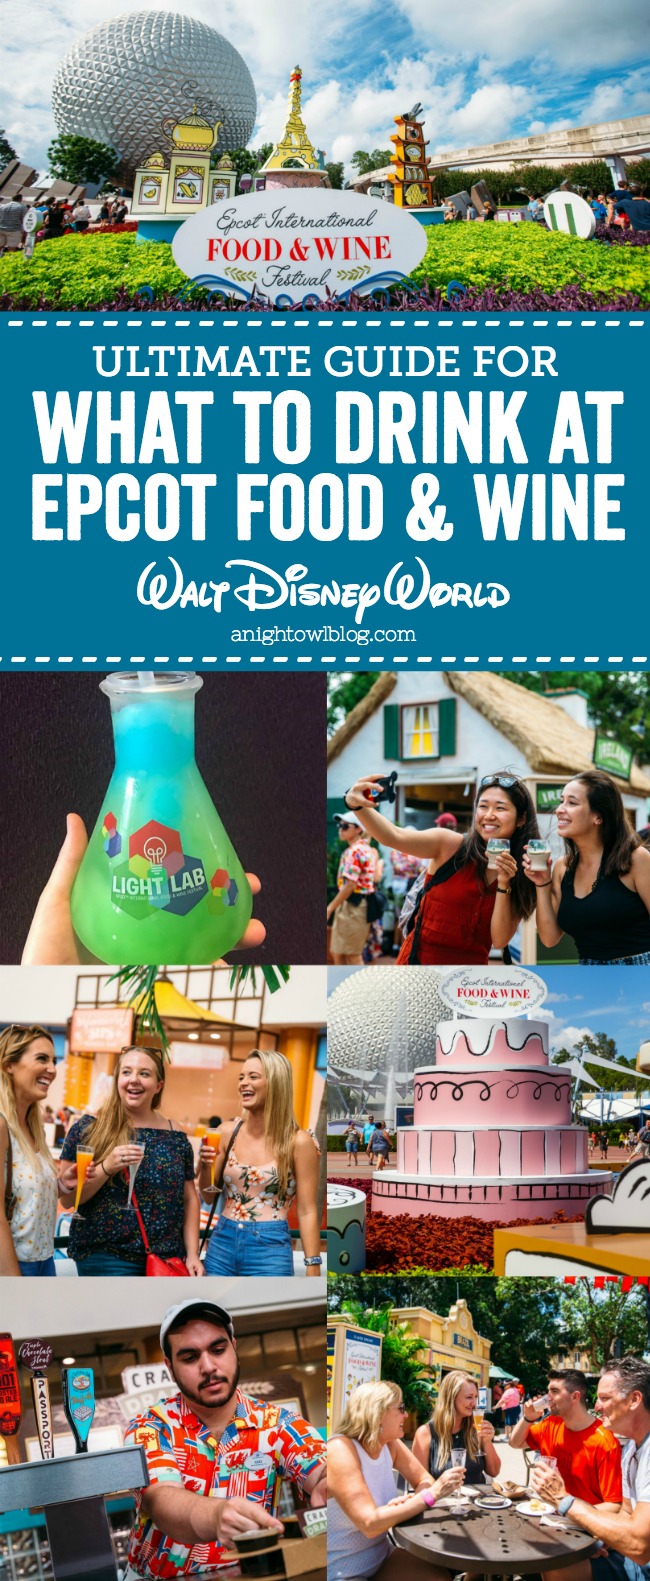 From Jam Jar Sweet Shiraz to the Phosphorescent Phreeze, Disney drink expert Felice of @disneysips shares her top picks for What to Drink at Epcot Food and Wine!